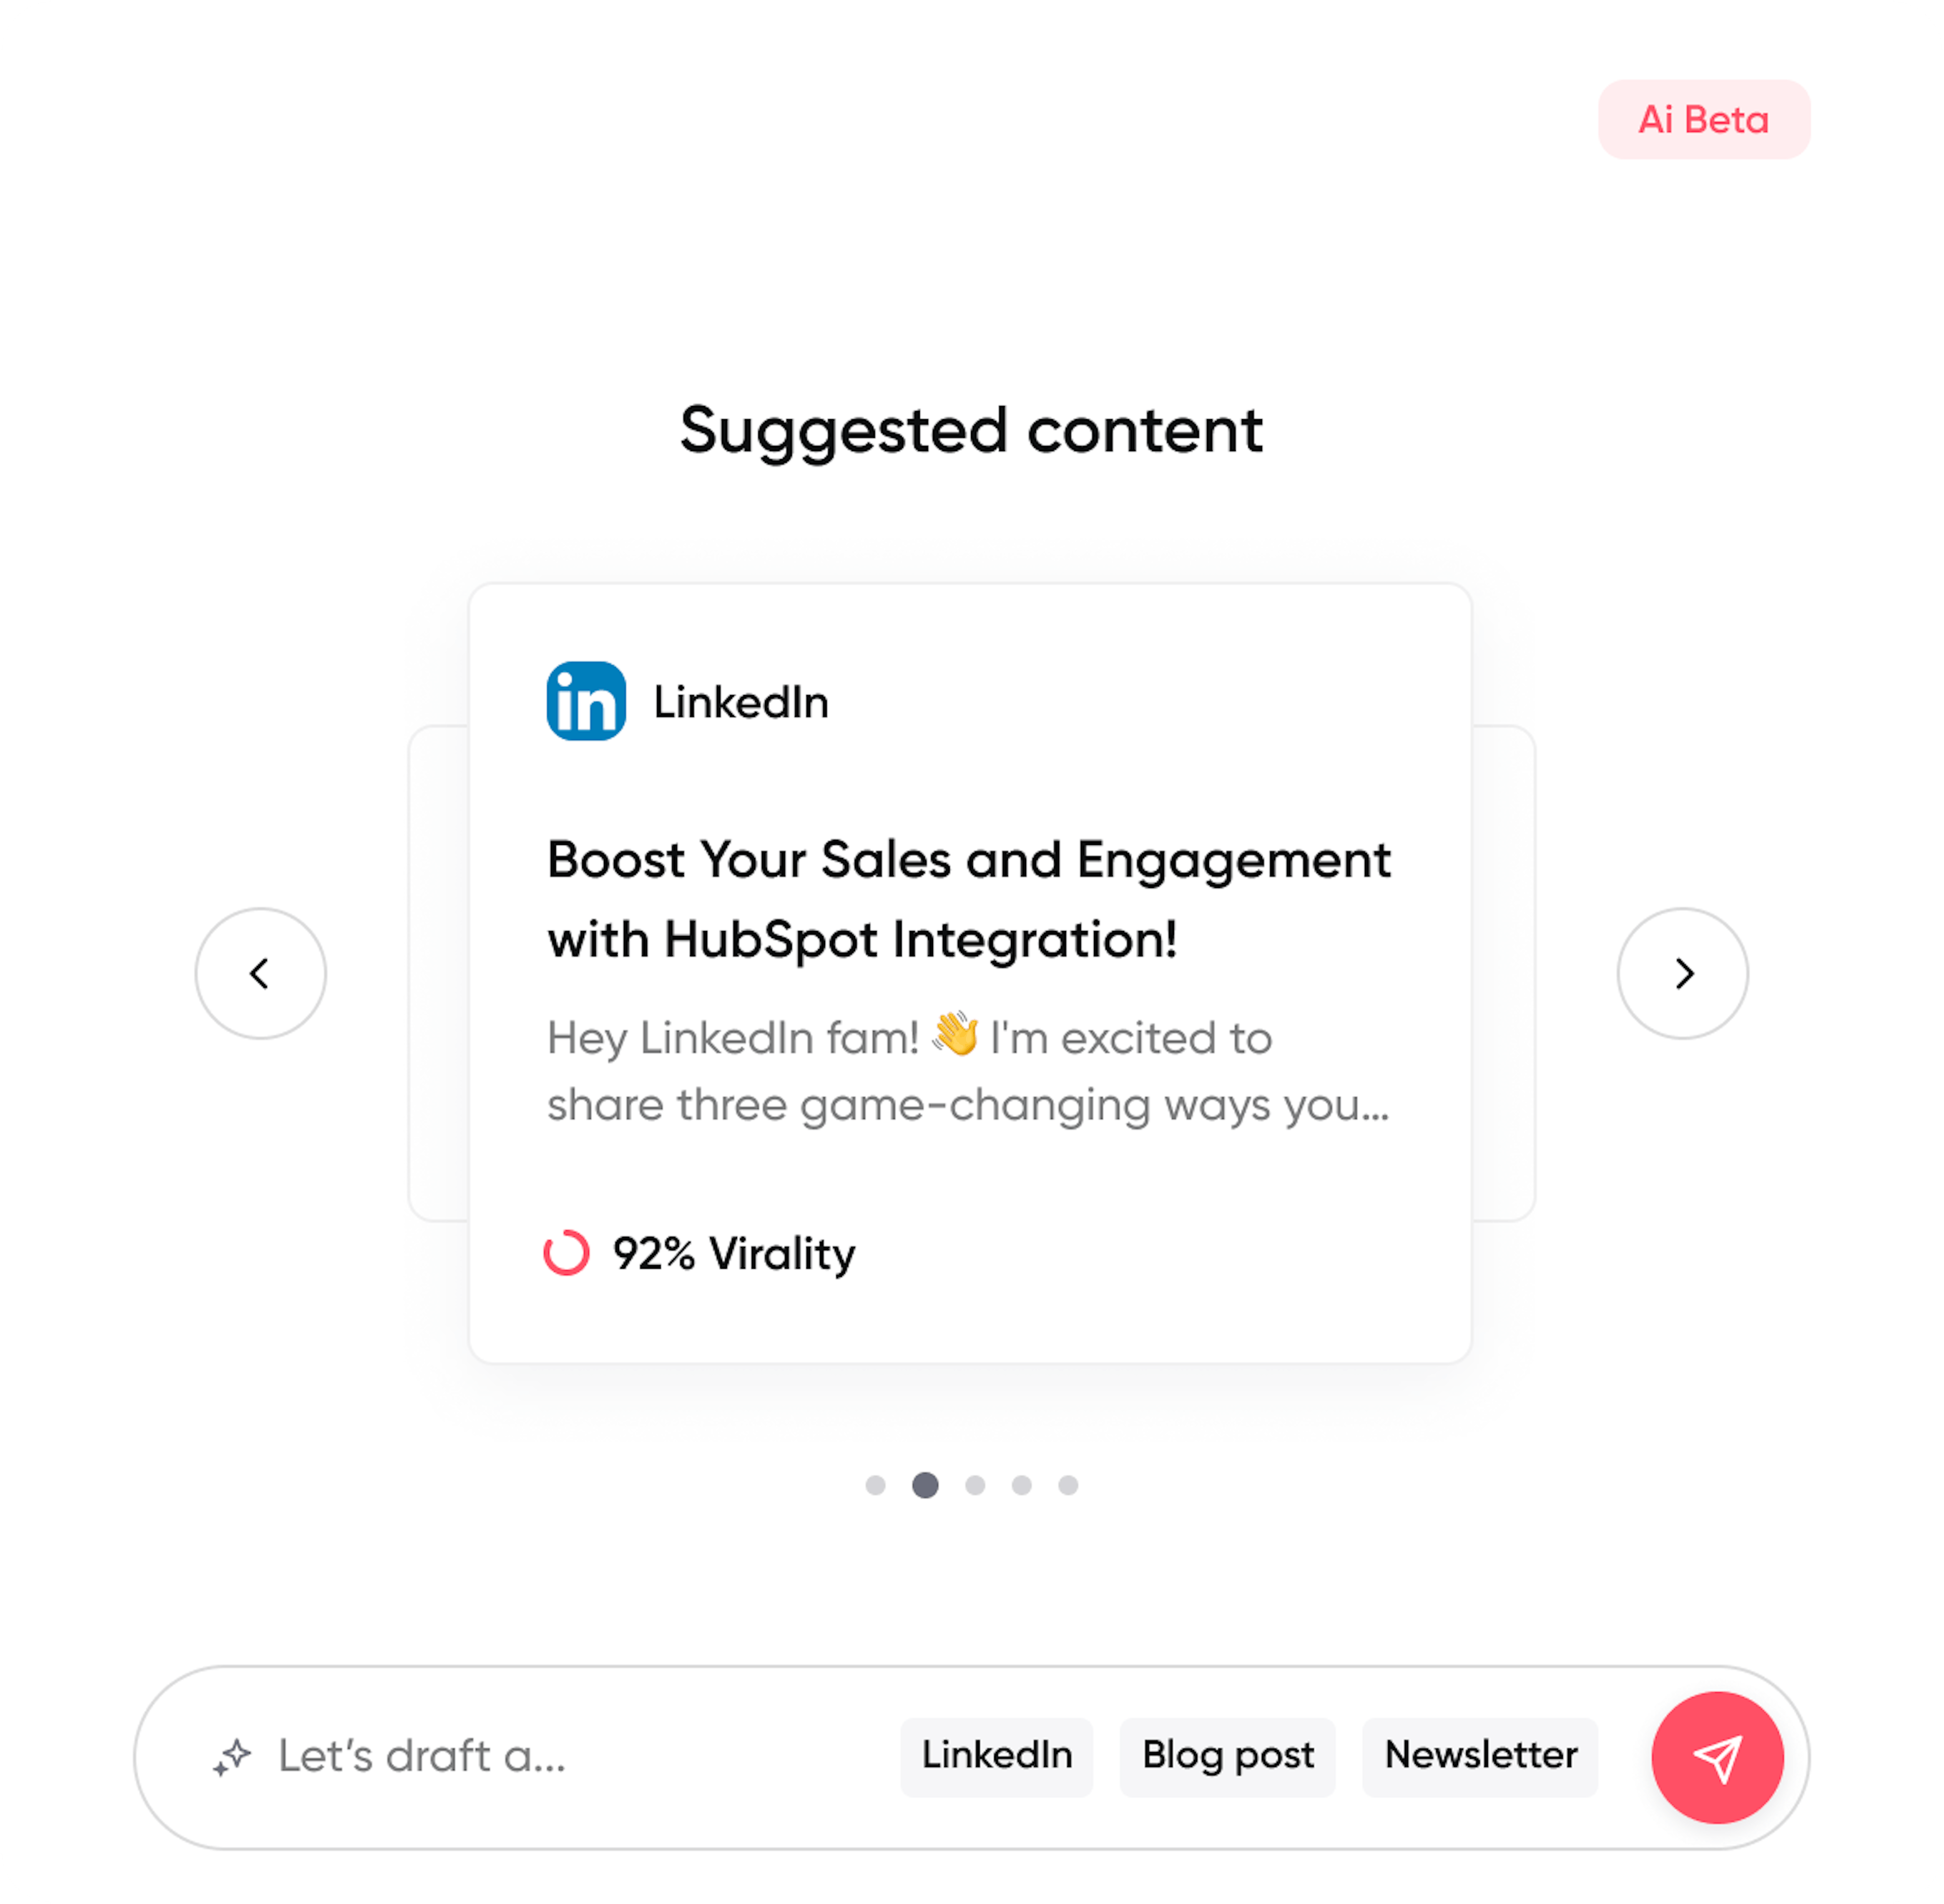 Screenshot that shows suggested content from Repurpose Ai